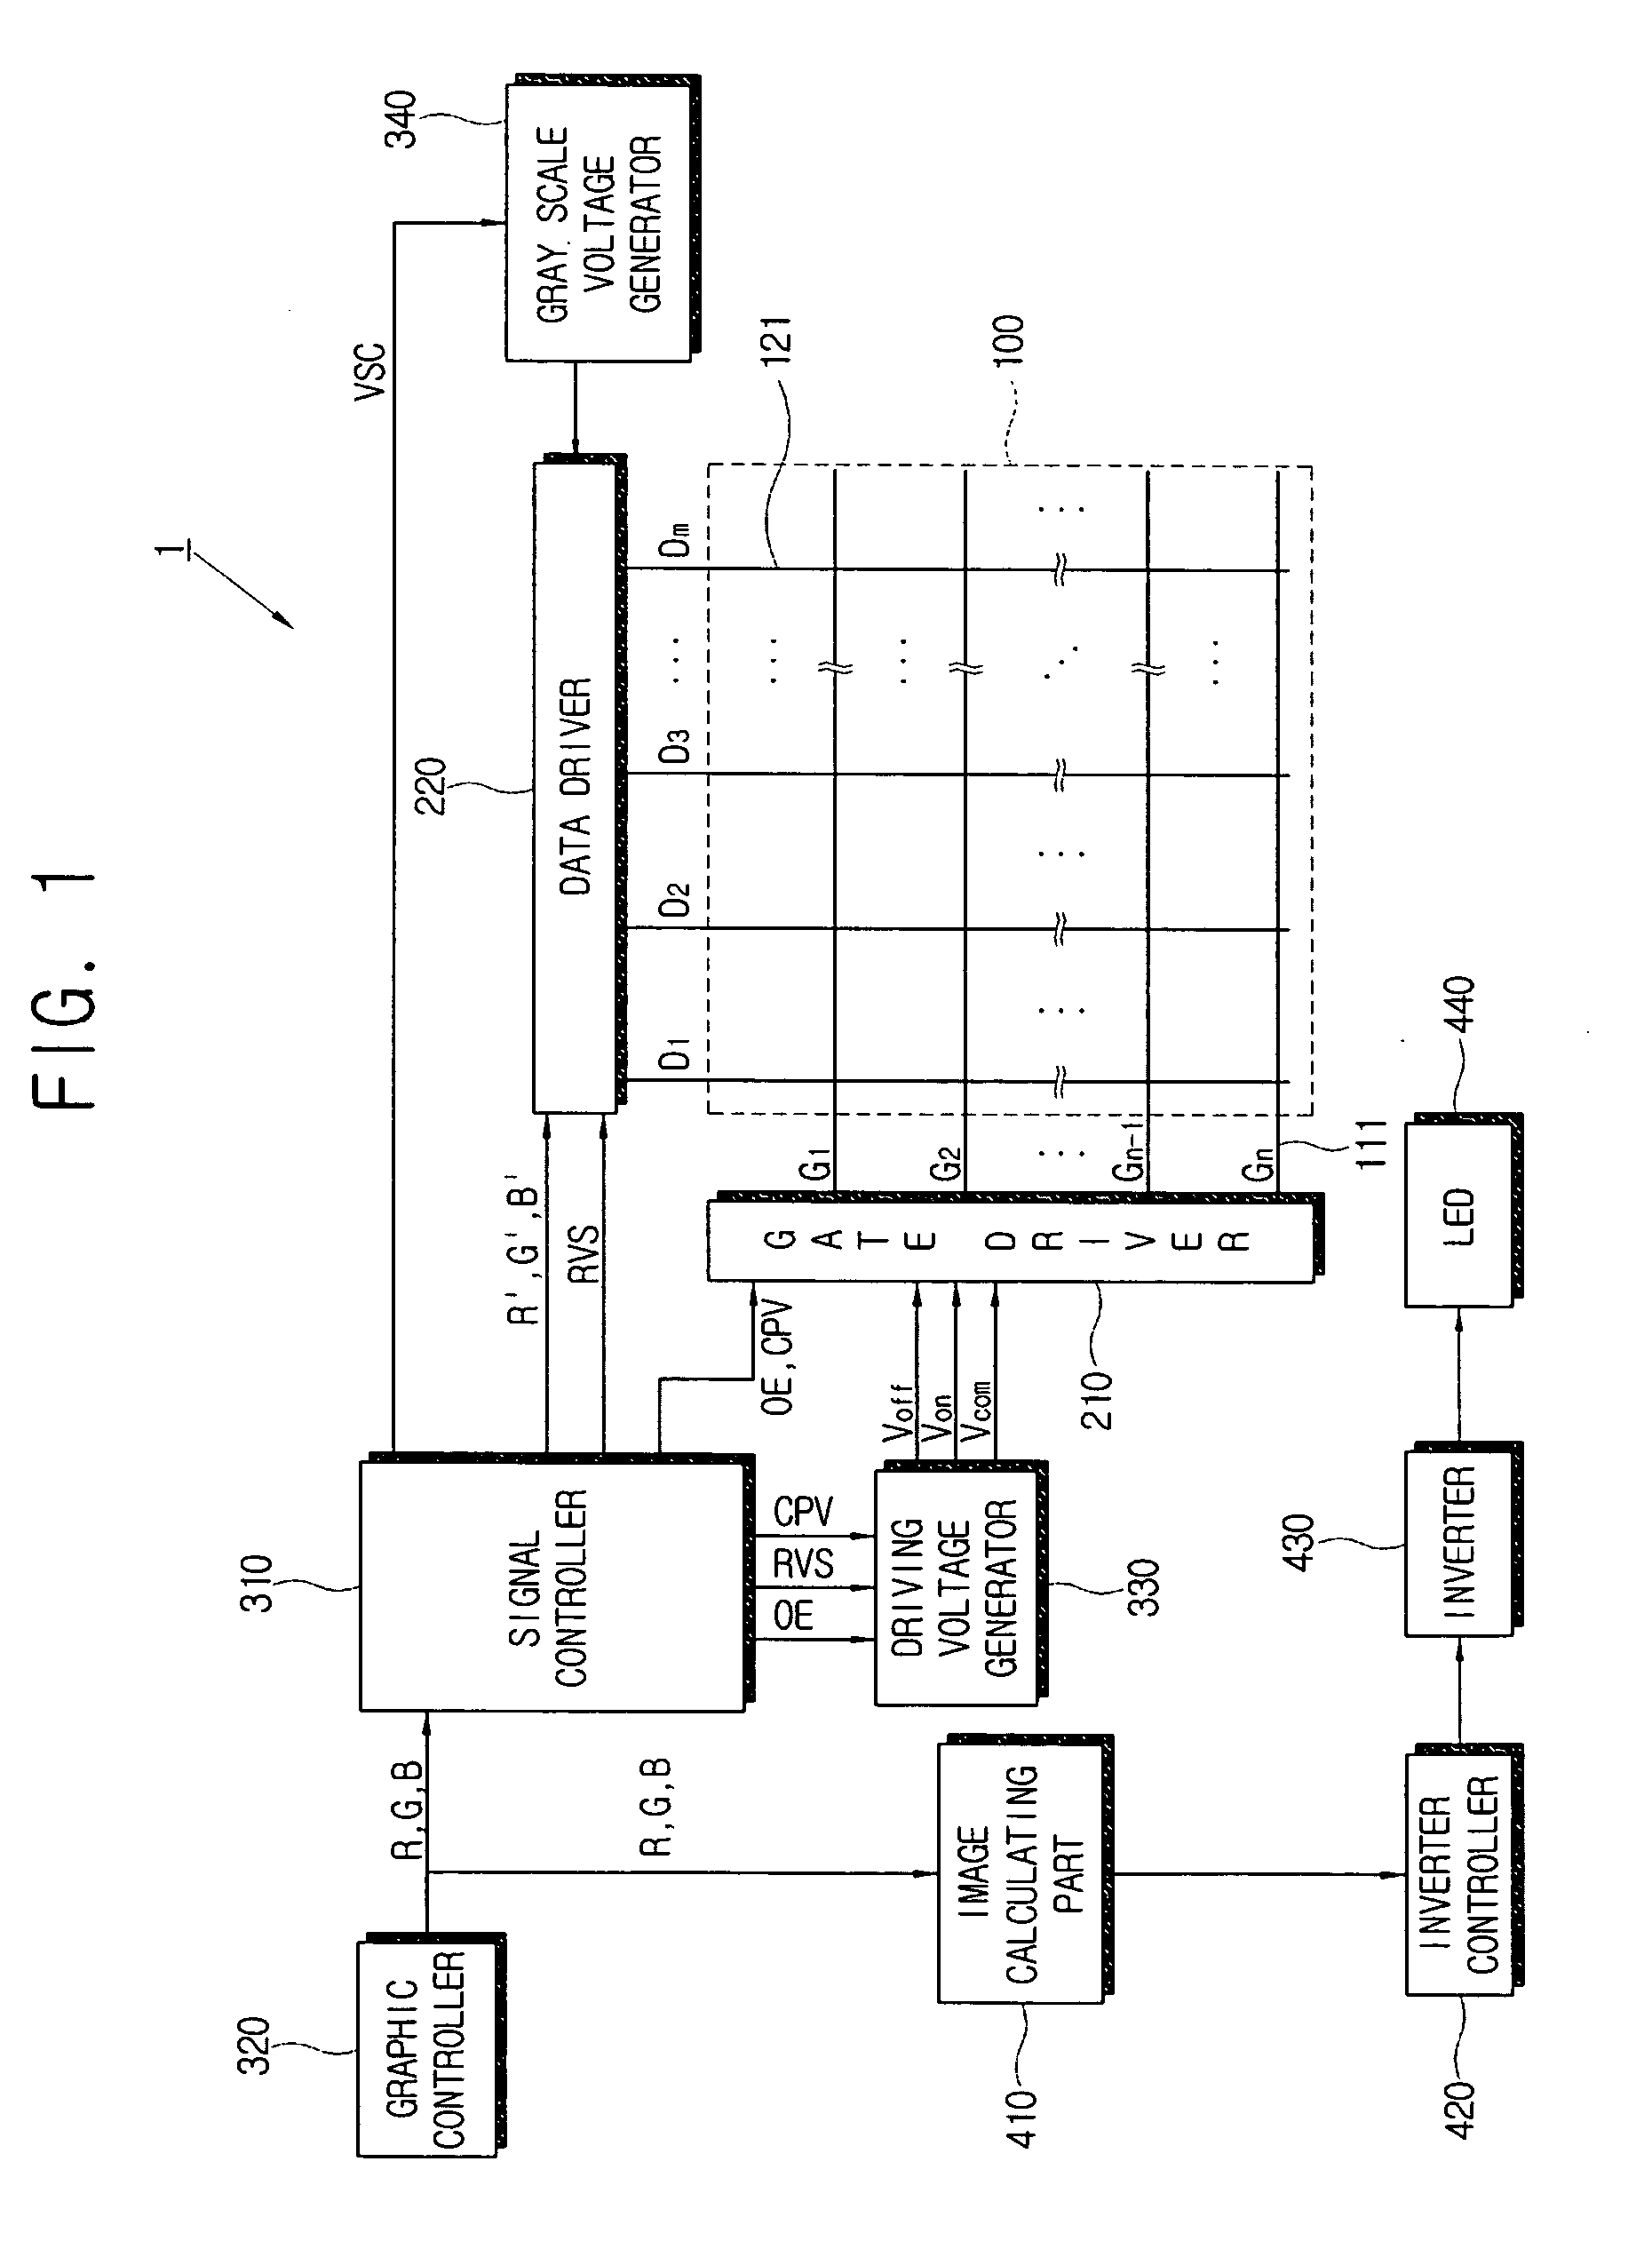 Liquid crystal display and method of controlling the same